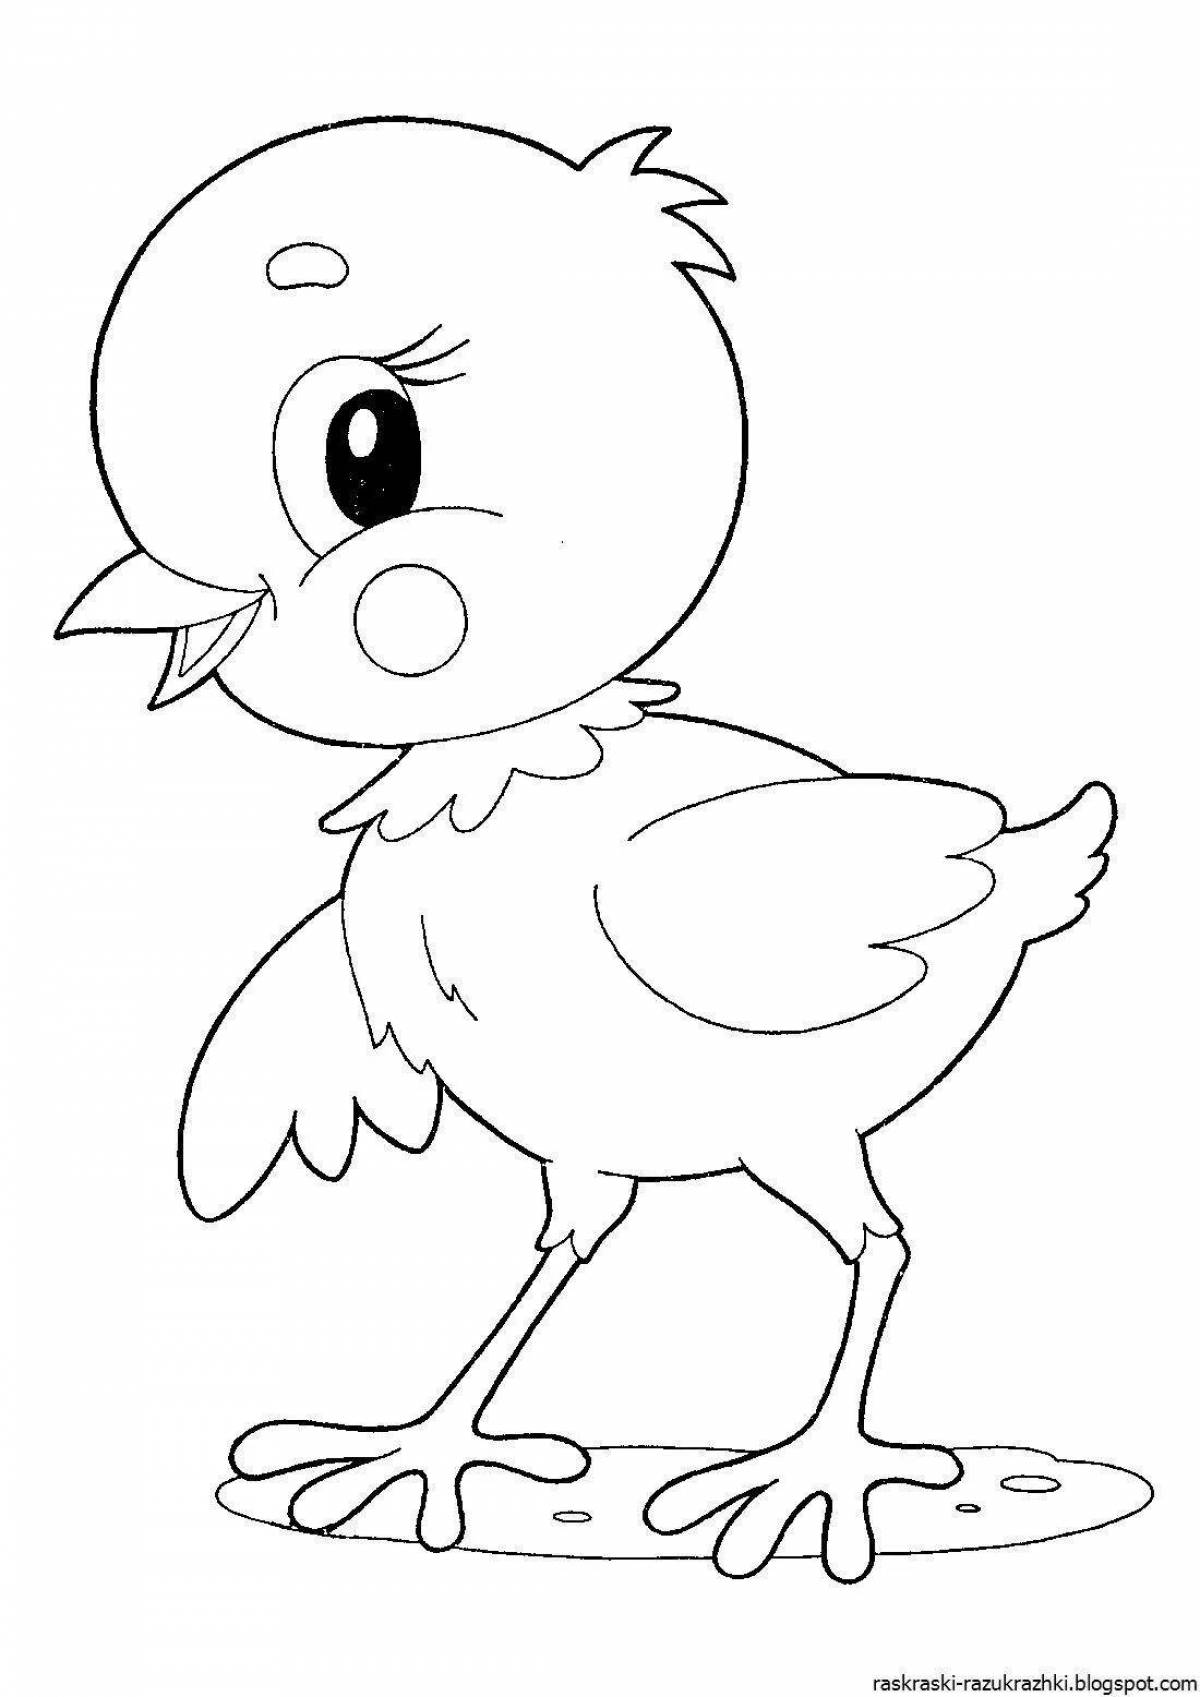 Coloring pages for kids 6-7 years old